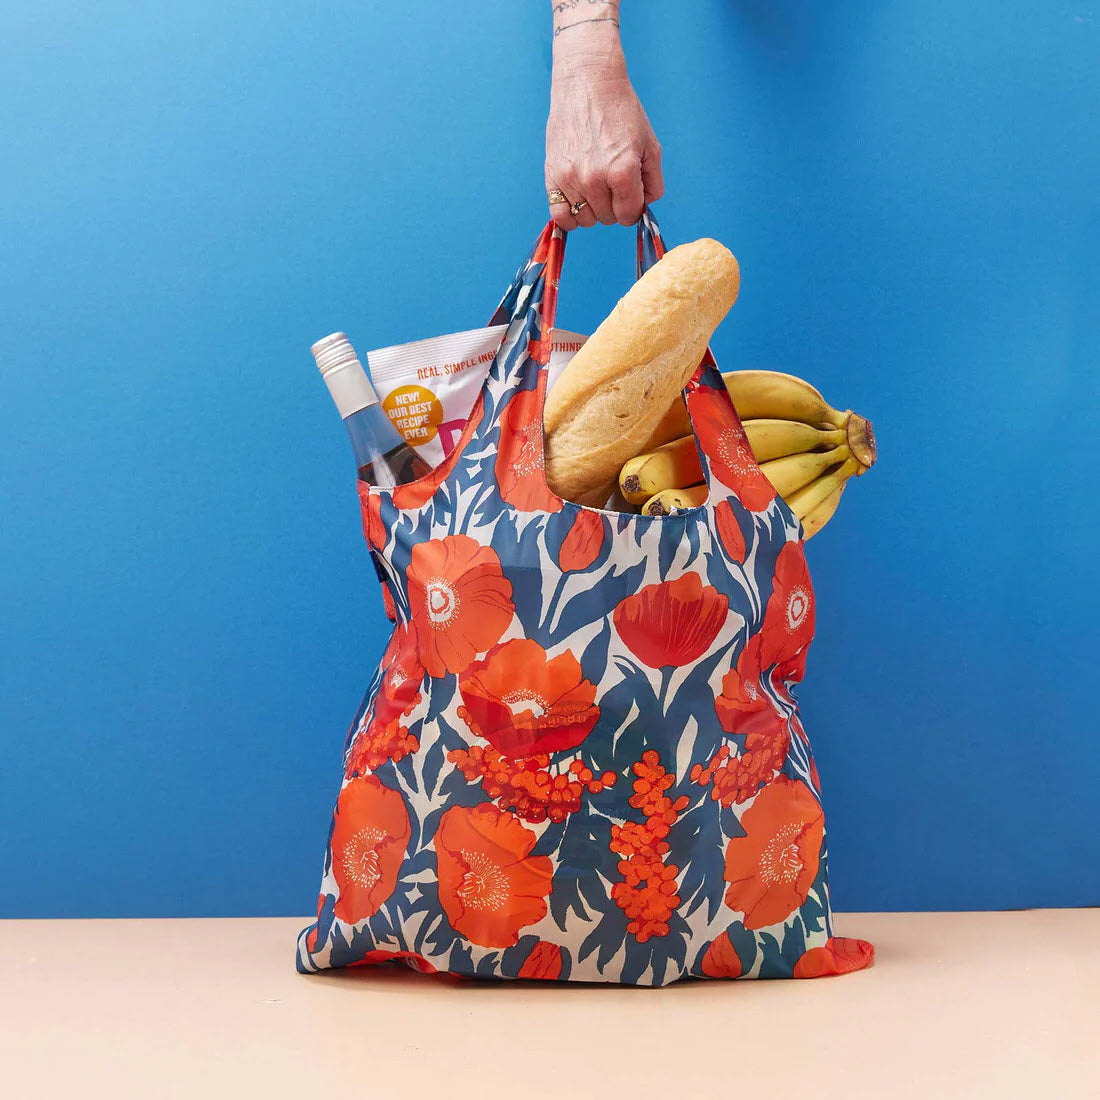 A person holding a Rockflowerpaper BLU BAG ICELANDIC POPPIES filled with groceries including a baguette and bananas against a blue background.